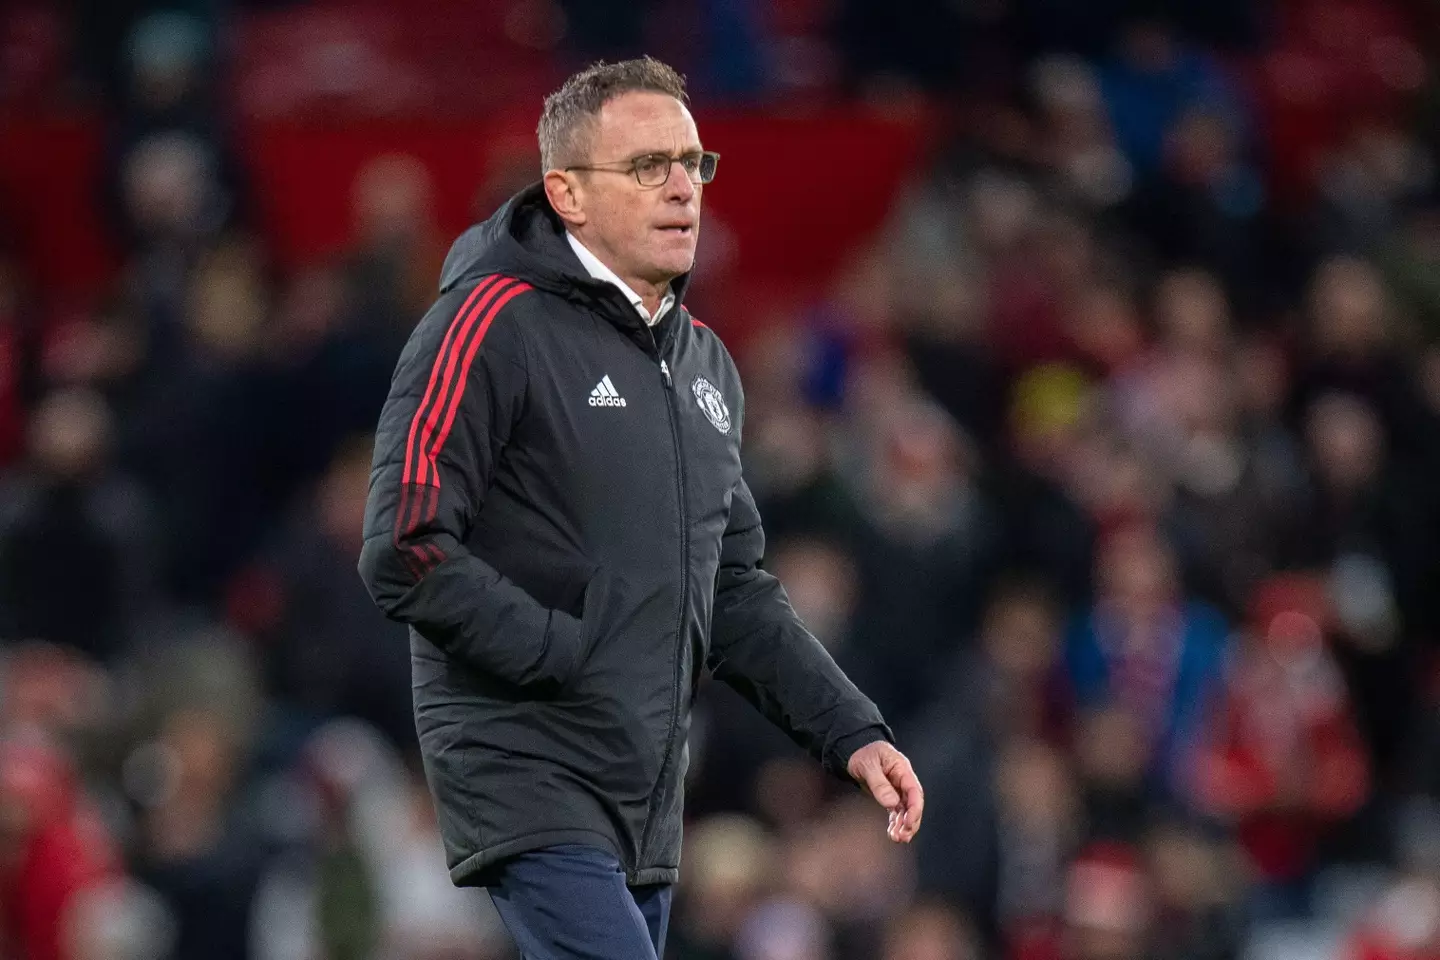 Ralf Rangnick has inherited a divided squad at Old Trafford (Image: Alamy)